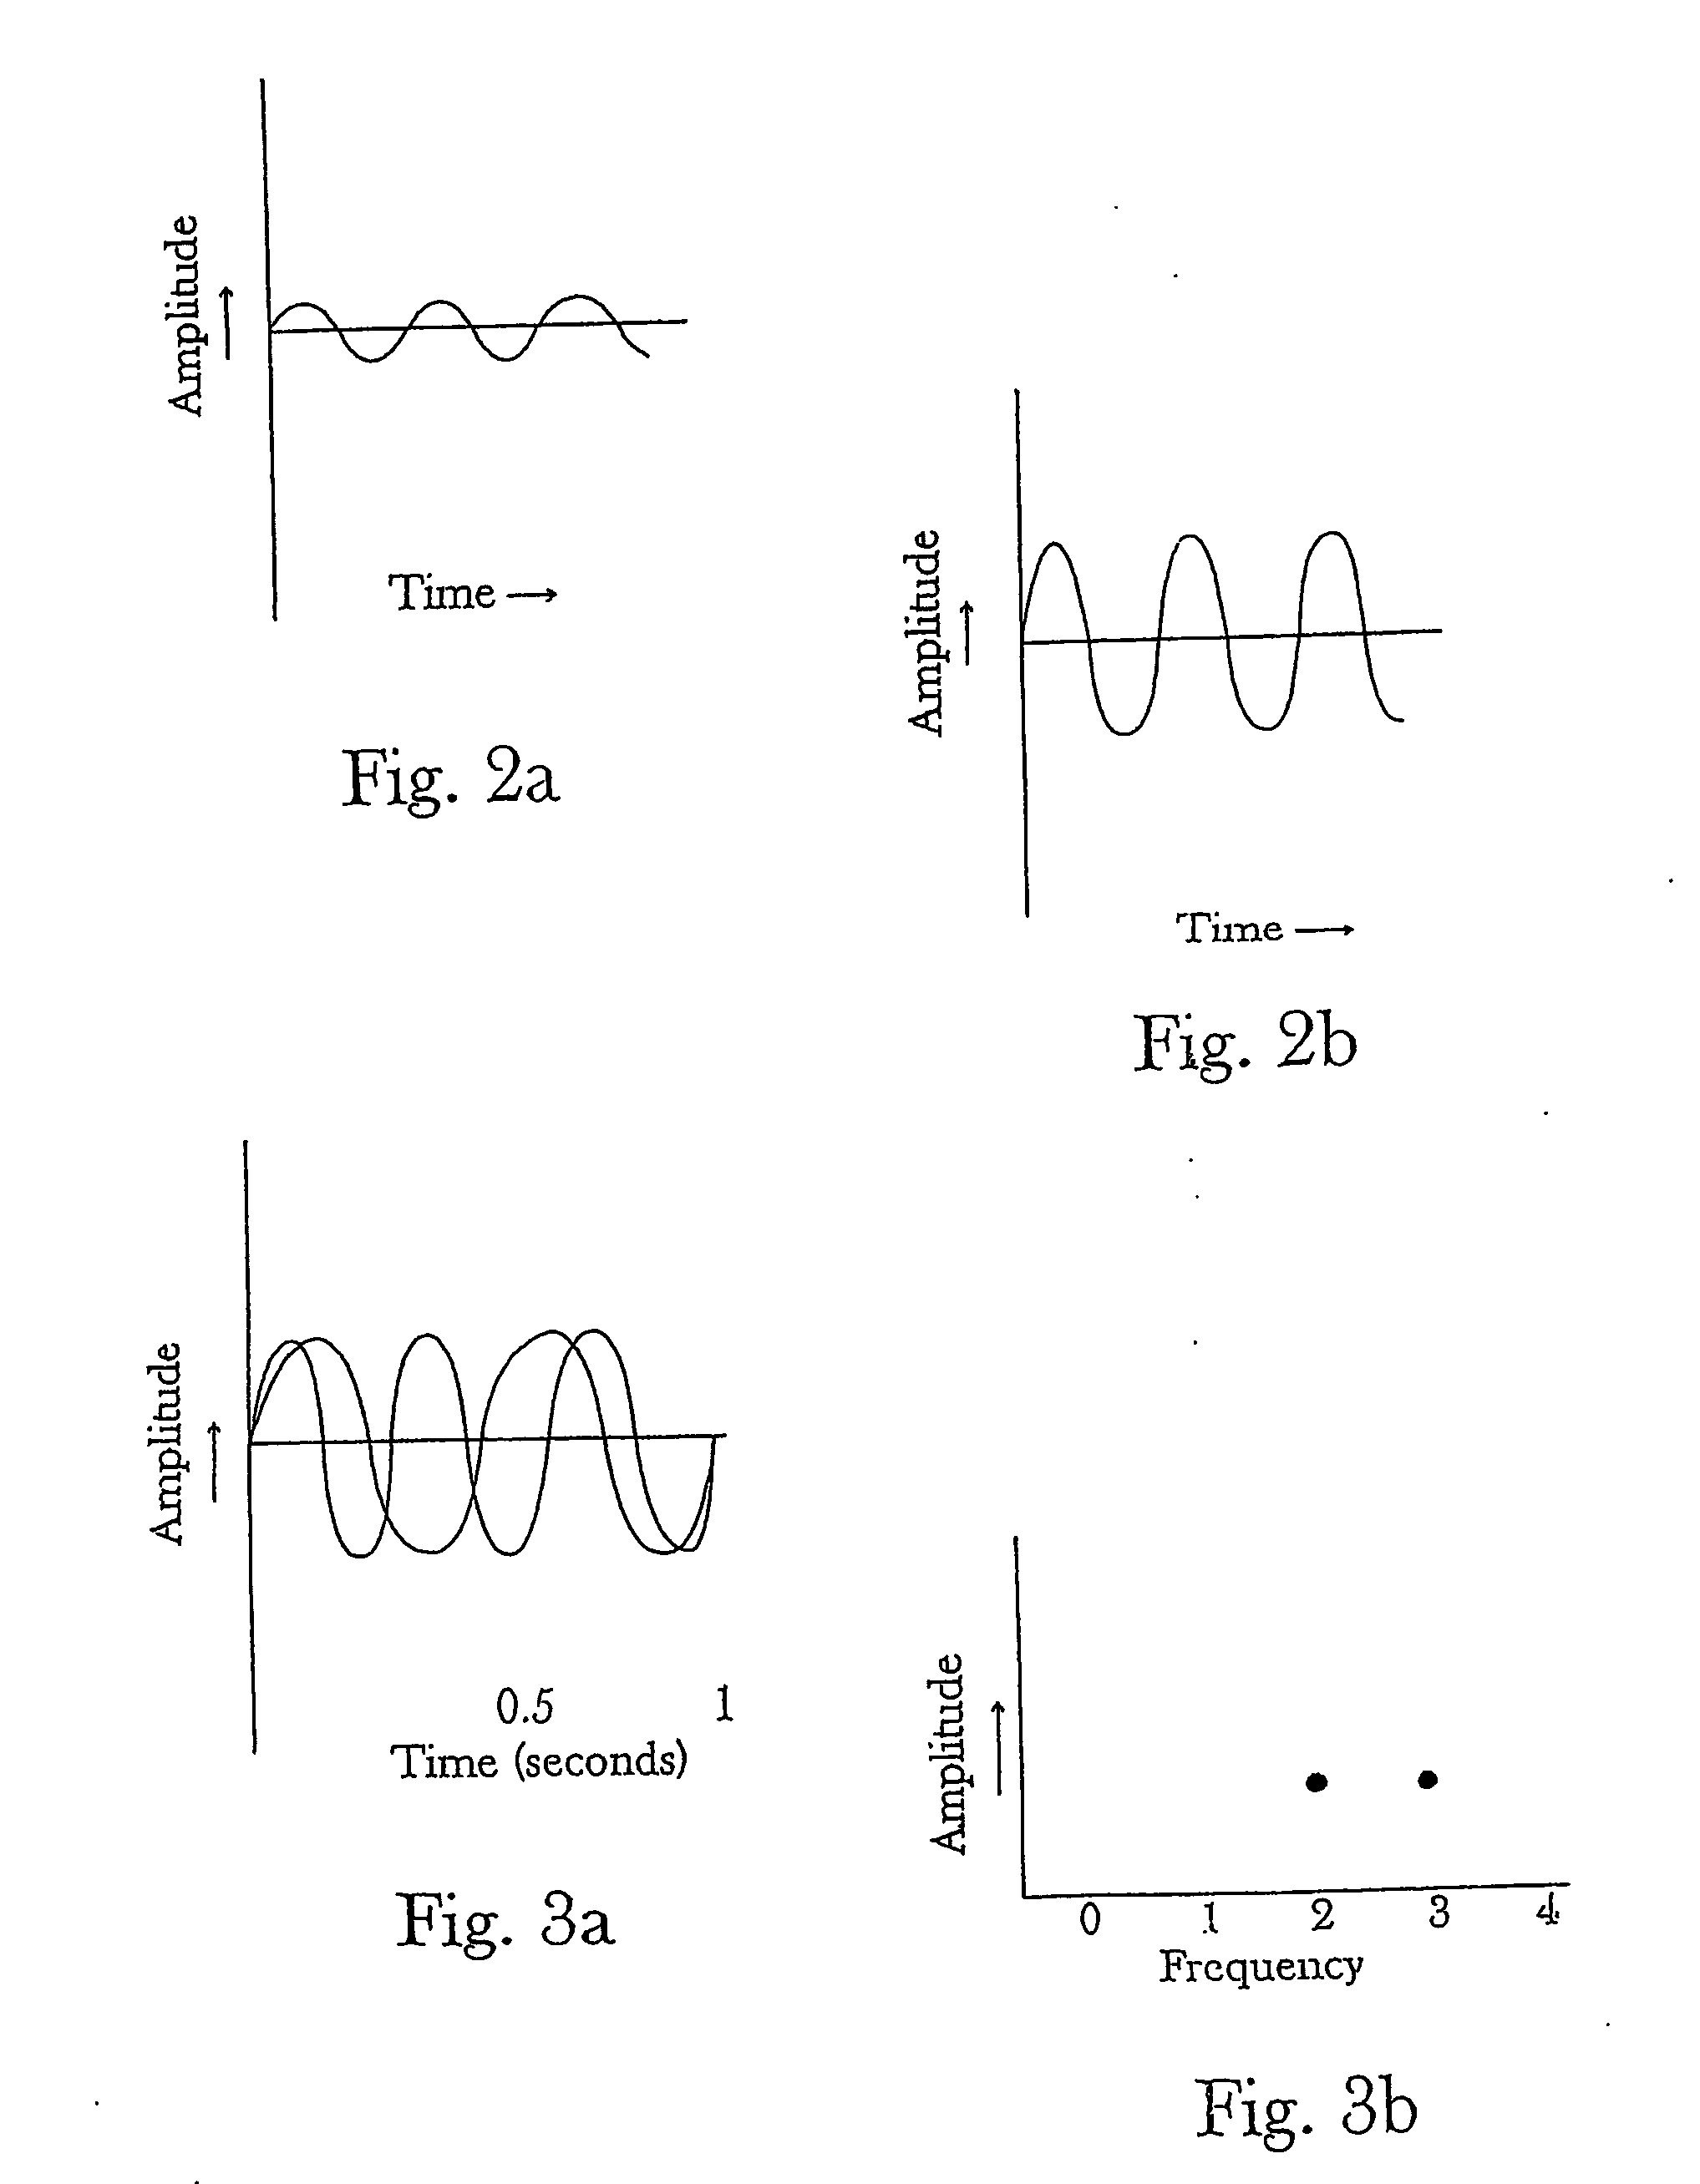 Methods for controlling crystal growth, crystallization, structures and phases in materials and systems